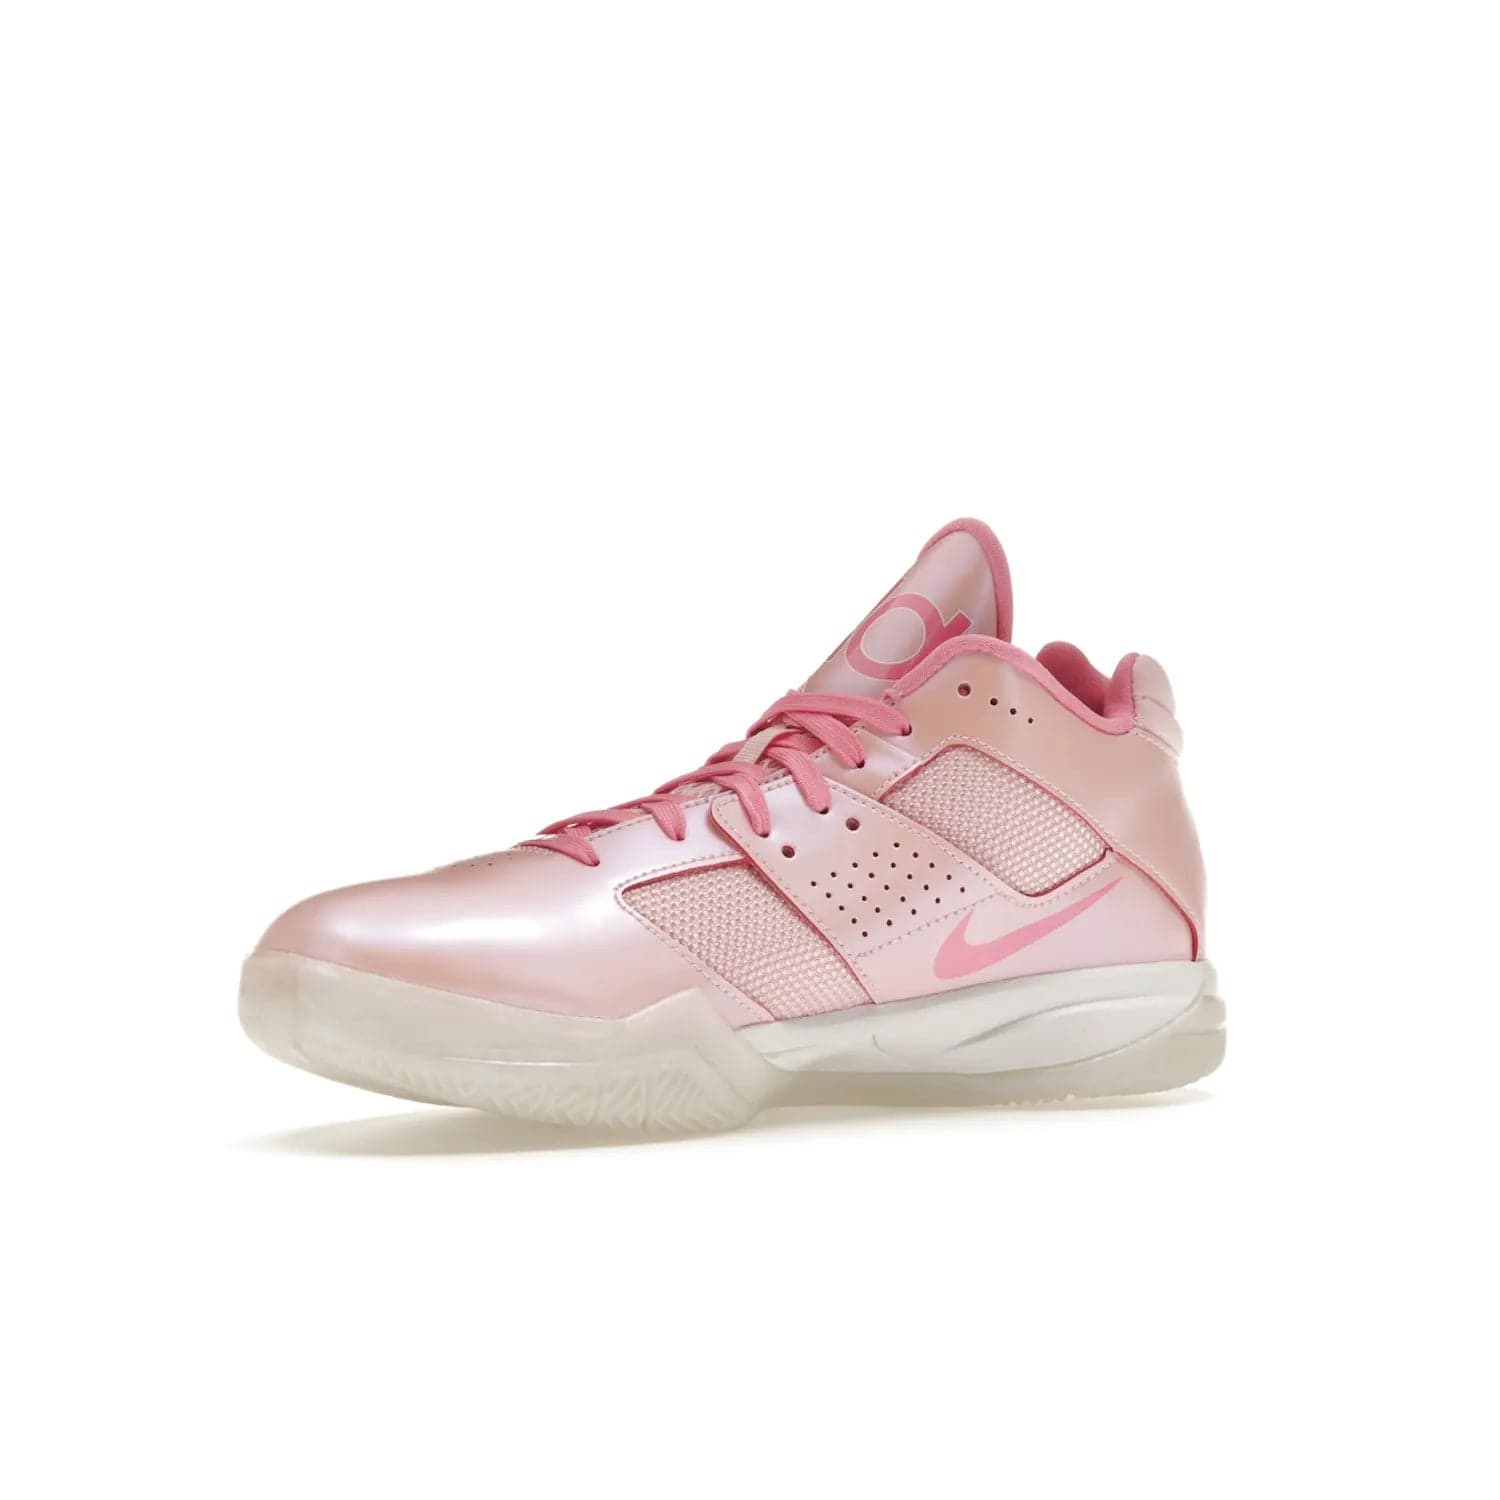 Nike KD 3 Aunt Pearl - Image 16 - Only at www.BallersClubKickz.com - Introducing the Nike KD 3 Aunt Pearl. Featuring a bold Medium Soft Pink, White, & Lotus Pink colorway. Get ready to stand out this October 15th.